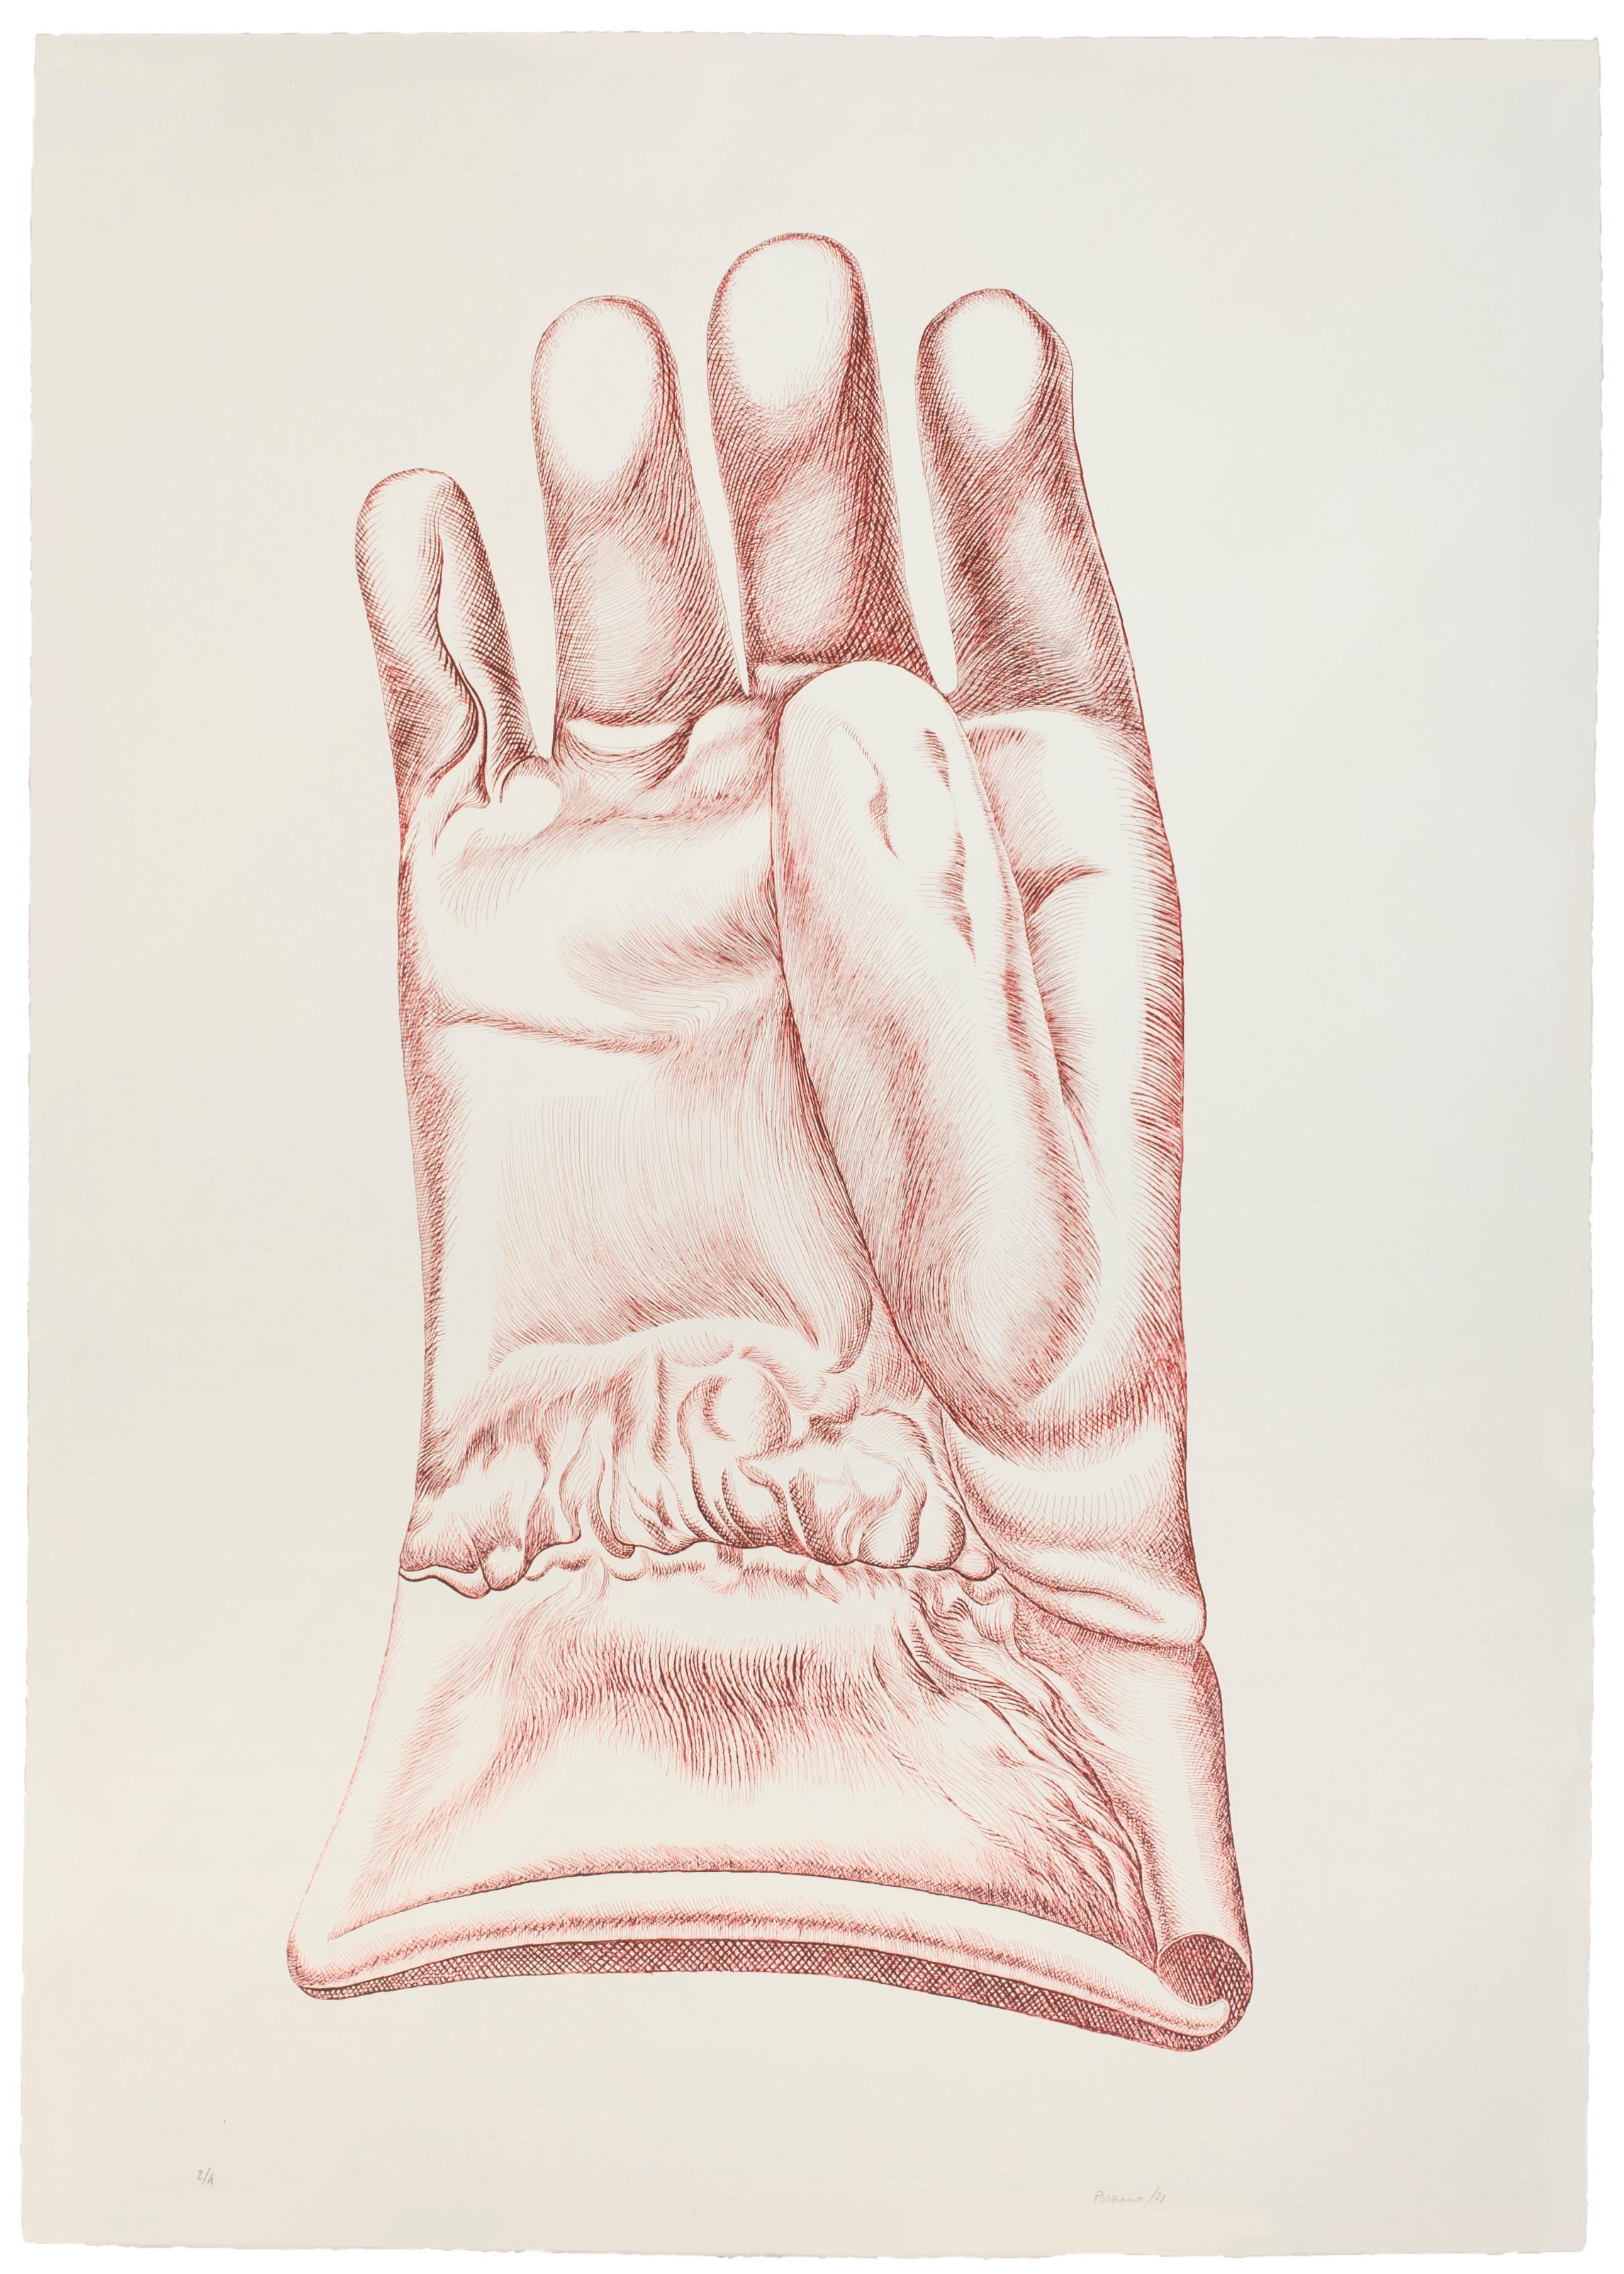 Red glove - Guanto rosso is a beautiful burnt Sienna color etching on paper, realized in 1972 by the Italian artist Giacomo Porzano (1925-2006).

Hand-signed, dated and numbered by the artist in pencil.

Edition of 4 prints.

In excellent